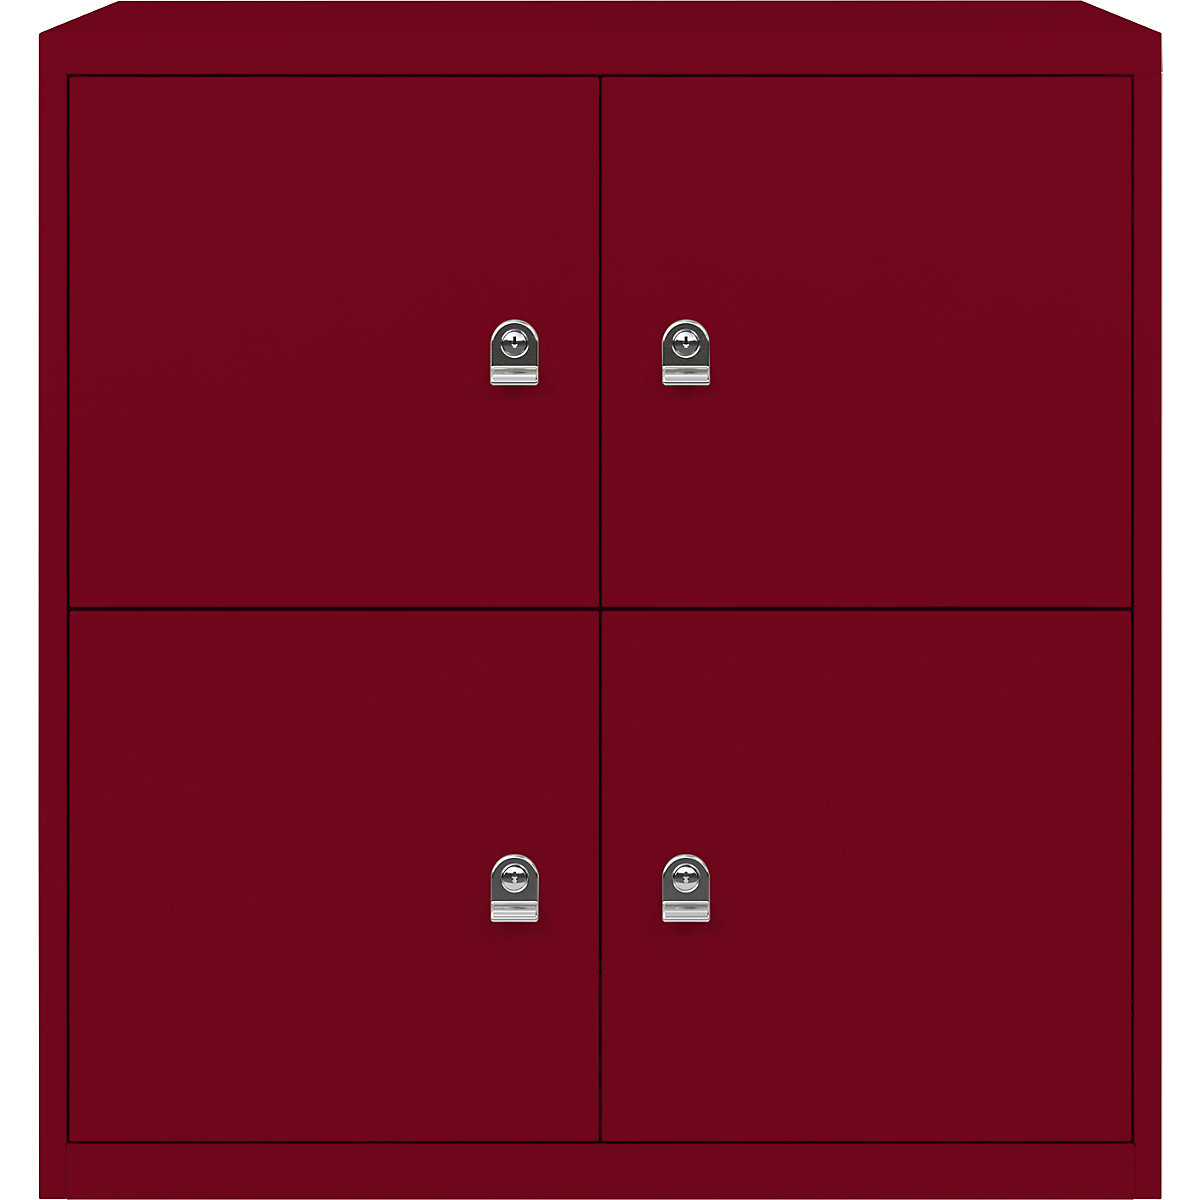 BISLEY – LateralFile™ lodge, with 4 lockable compartments, height 375 mm each, cardinal red